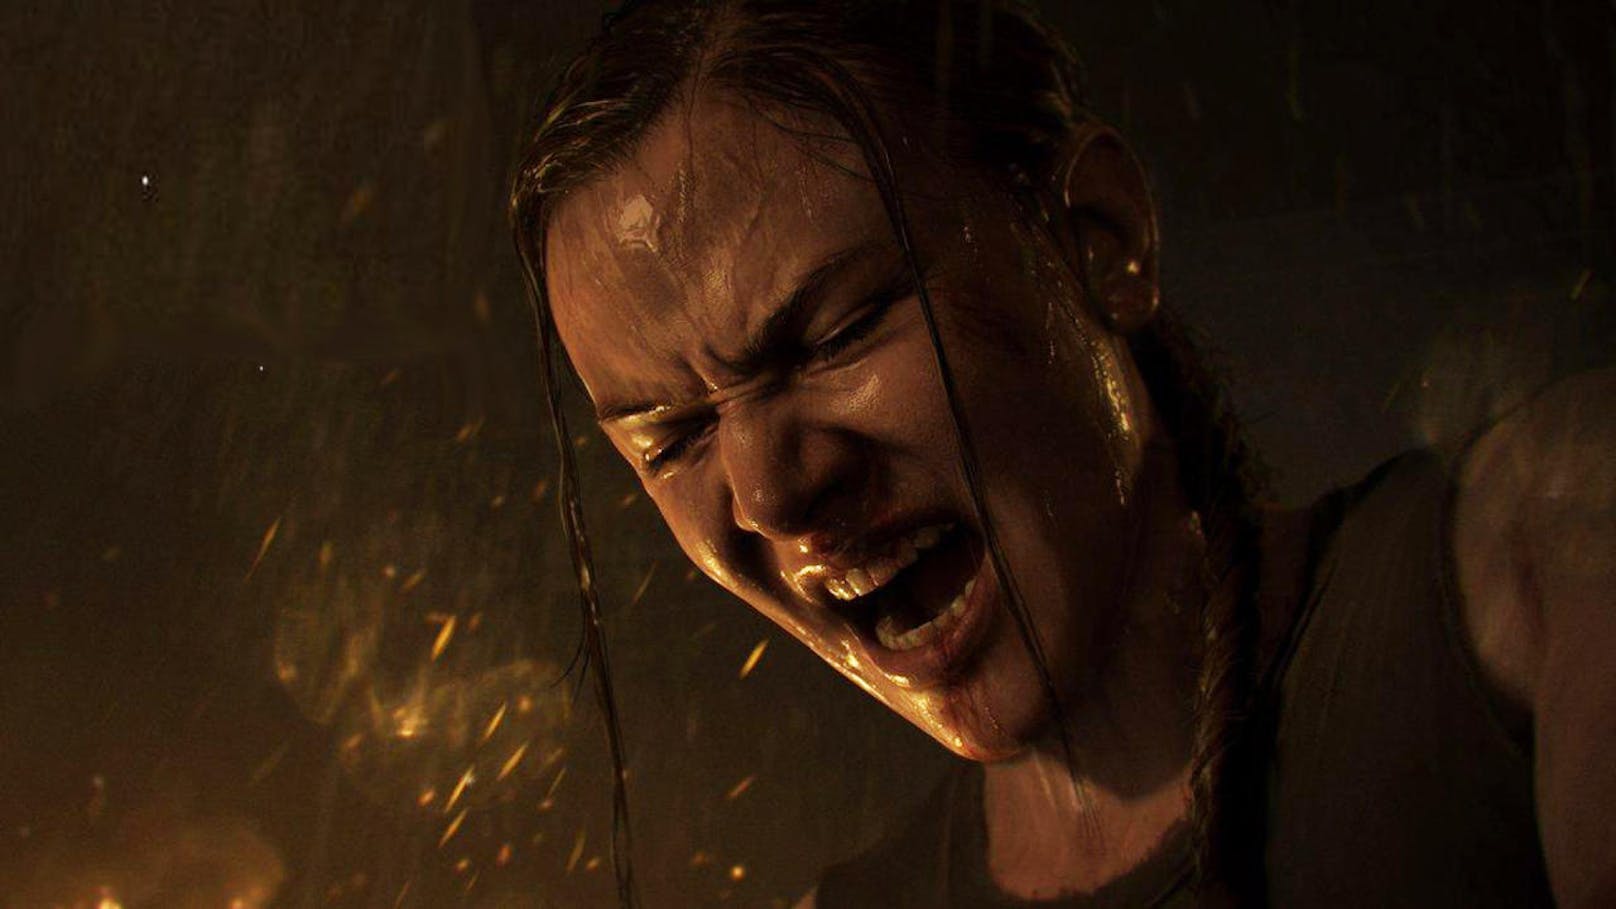 <b>Most Anticipated Game</b>
The Last of Us Part 2